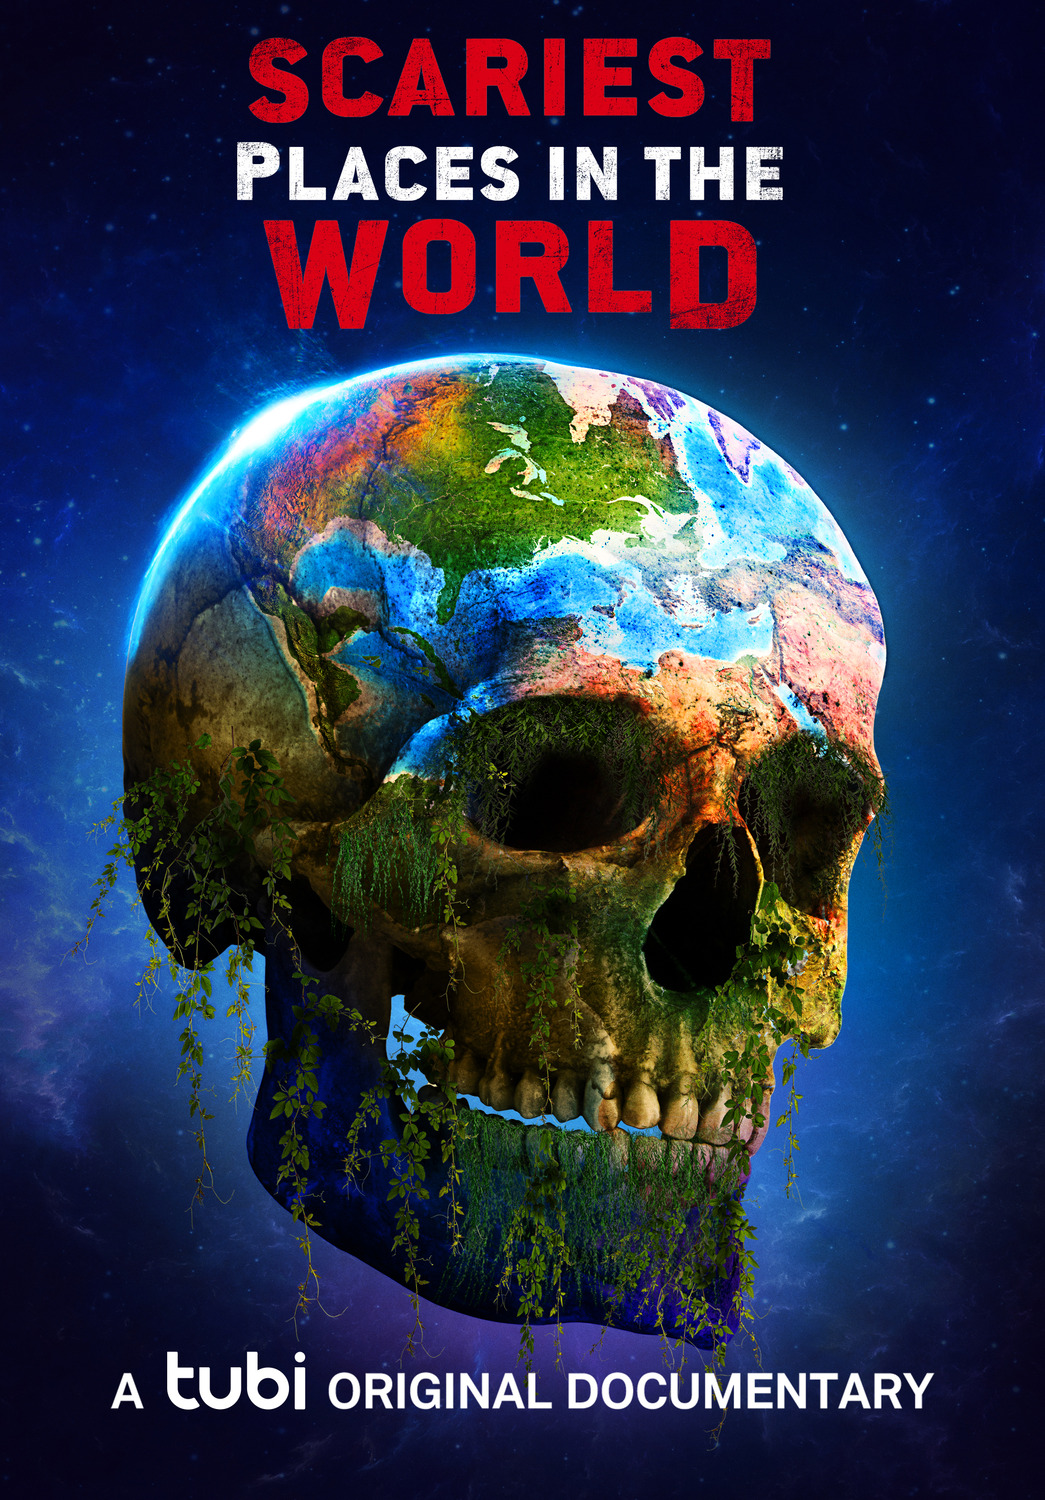 Extra Large Movie Poster Image for Scariest Places in the World 